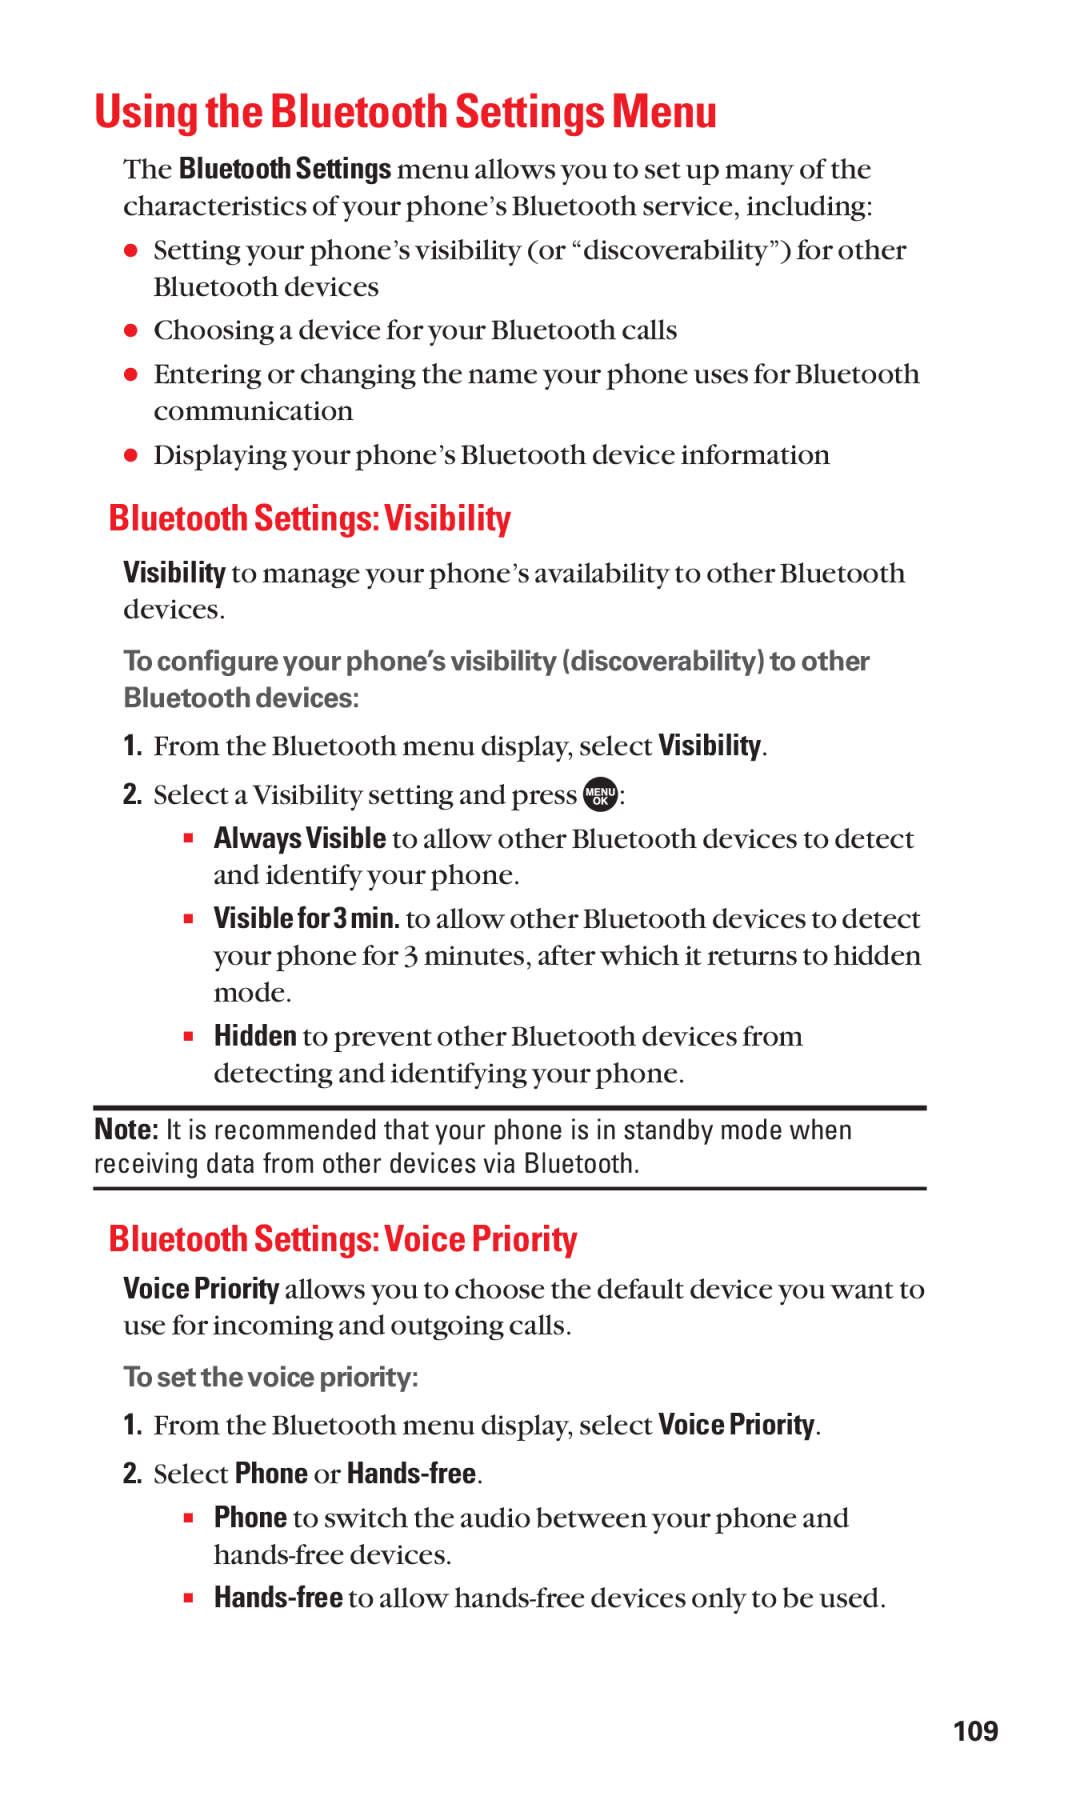 Sanyo SCP-7050 manual Using the Bluetooth Settings Menu, Bluetooth Settings Visibility, Bluetooth Settings Voice Priority 